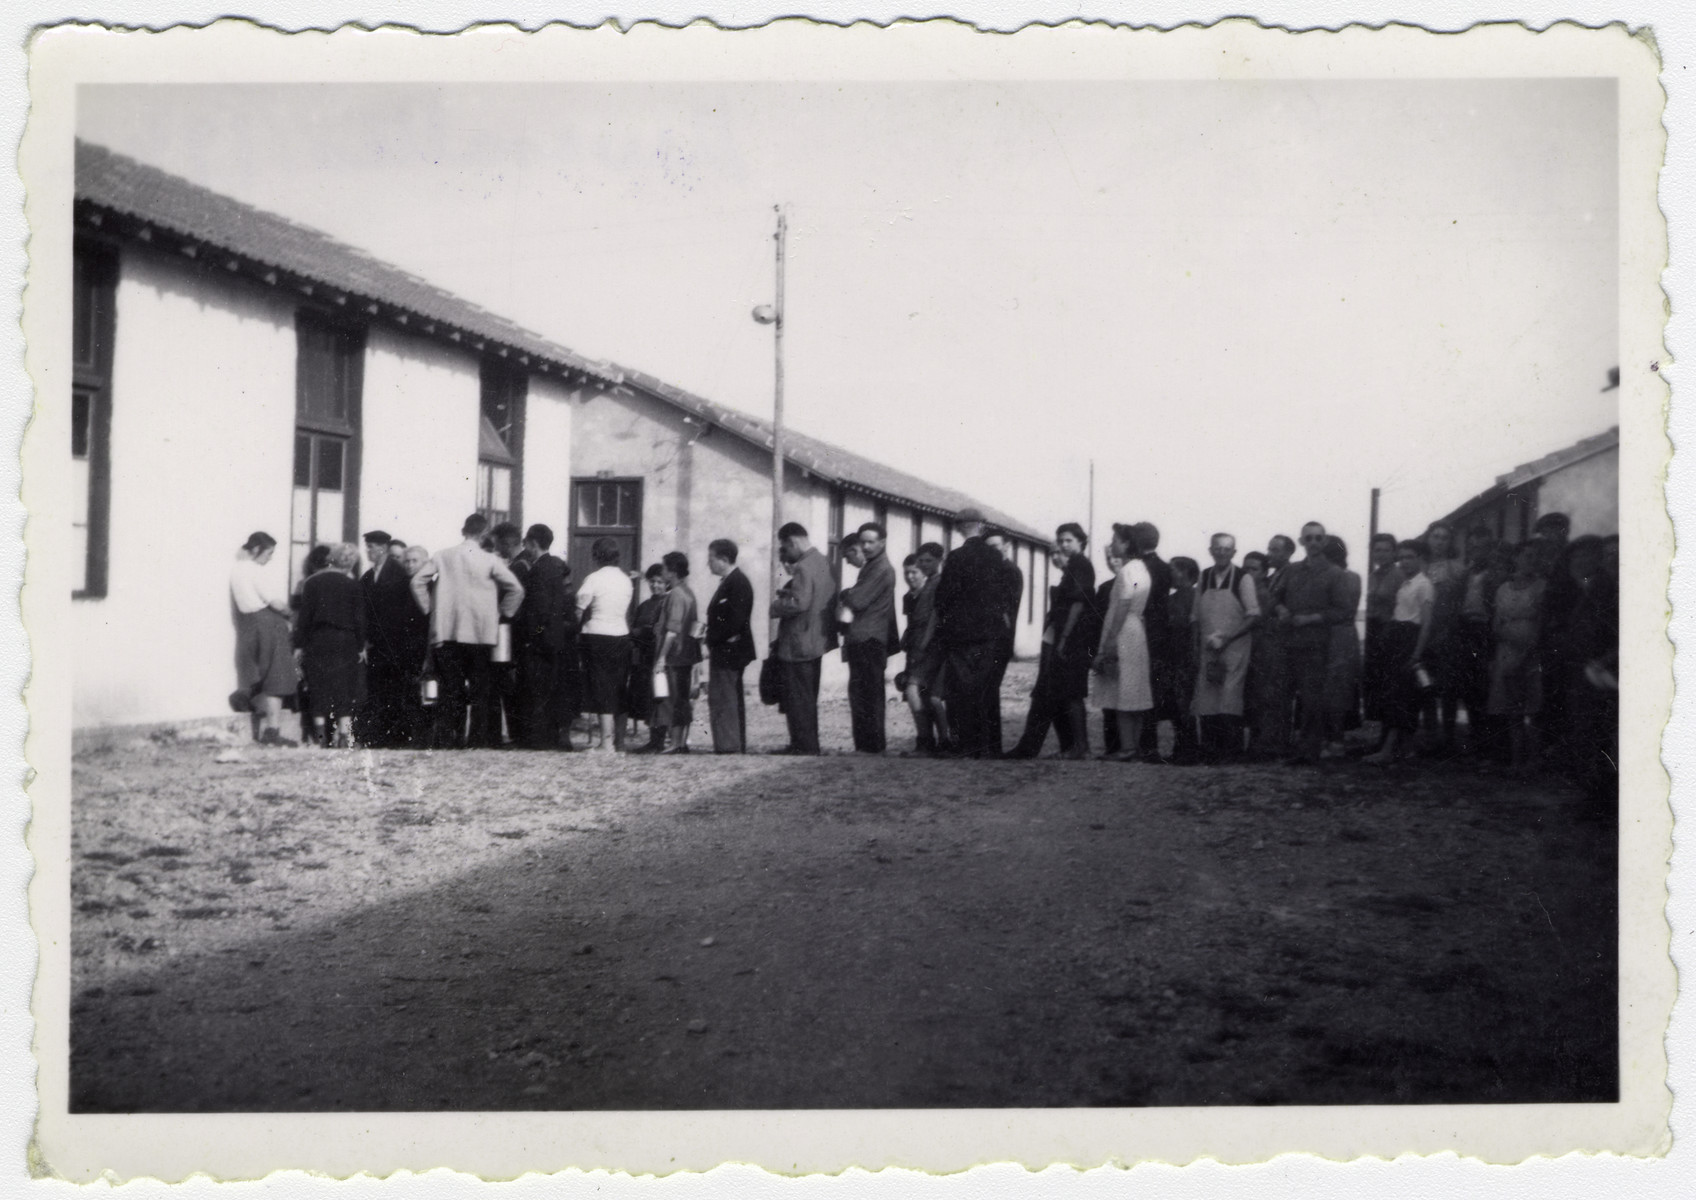 A line of prisoners wait to be served their rations at the Rivesaltes internment camp. 

Original caption reads: "The line for soup."